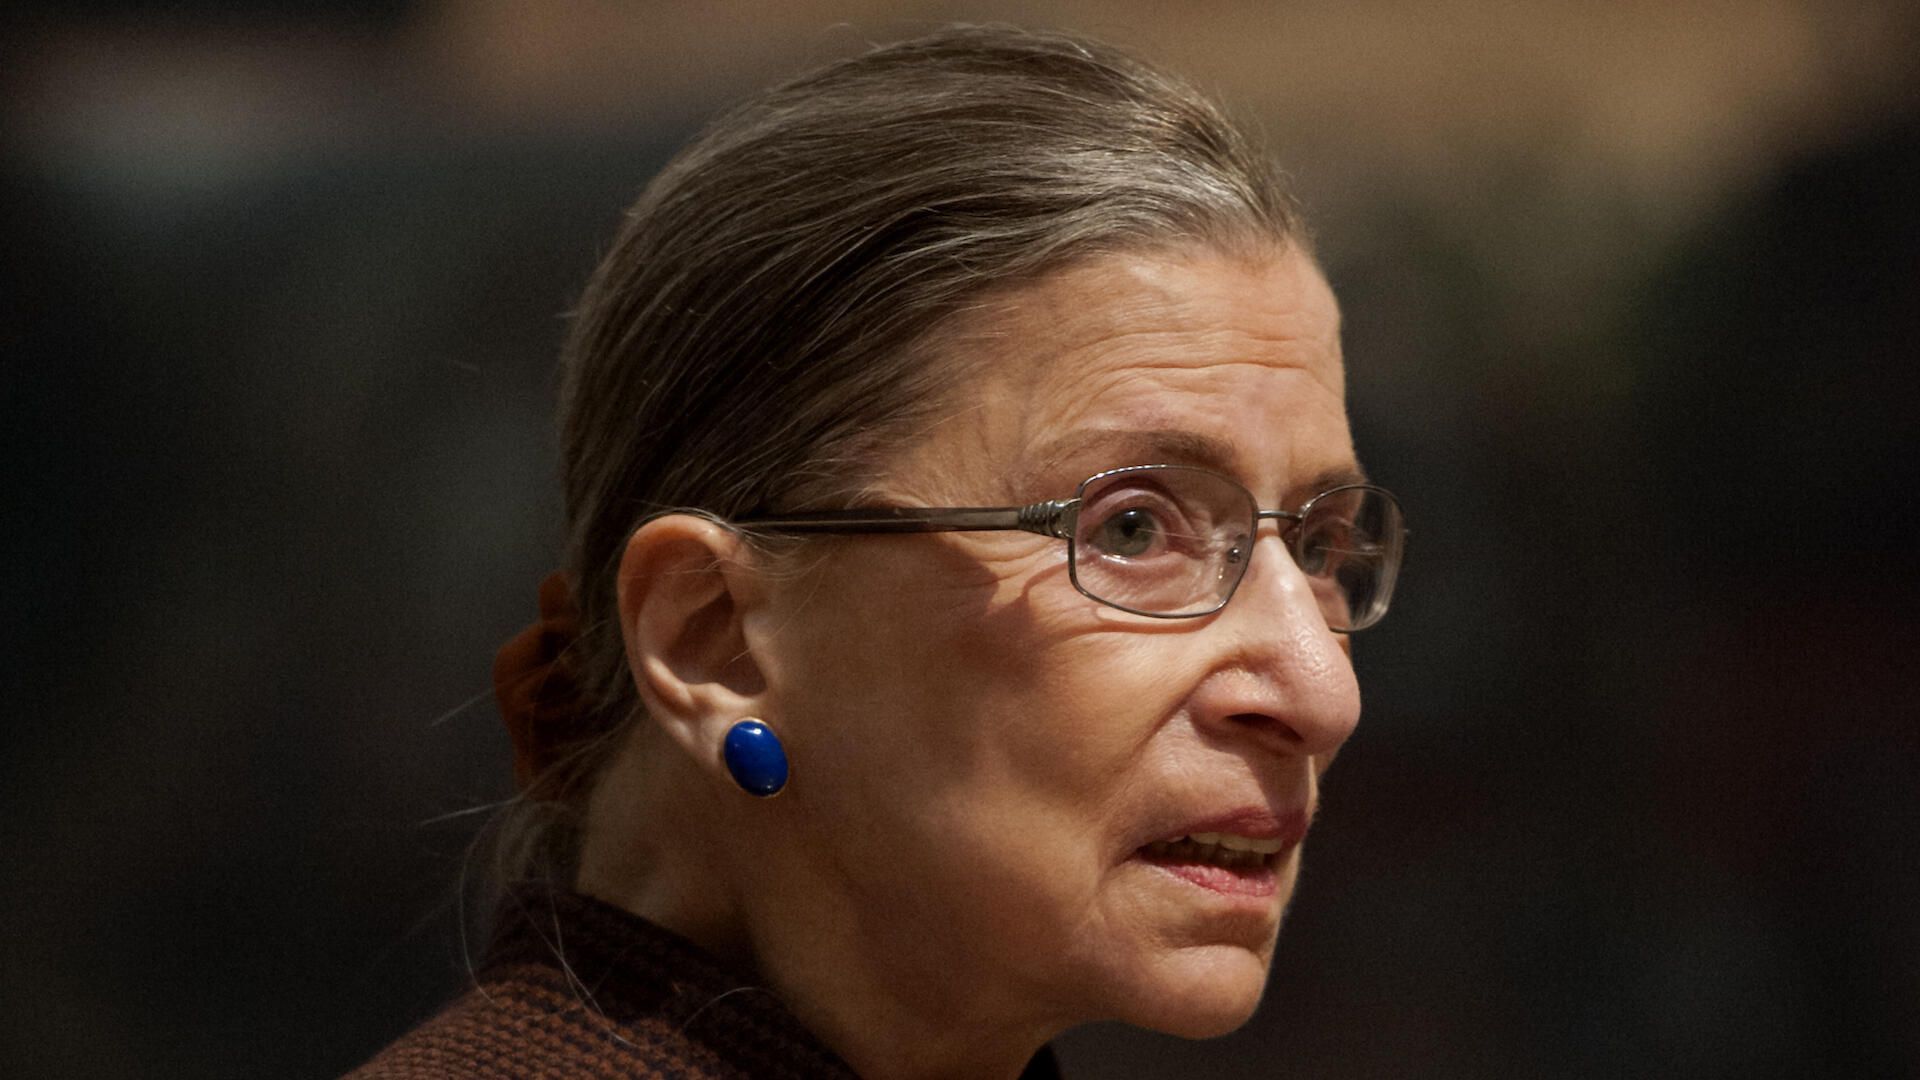 Supreme Court Justice Ruth Bader Ginsburg dead at 87